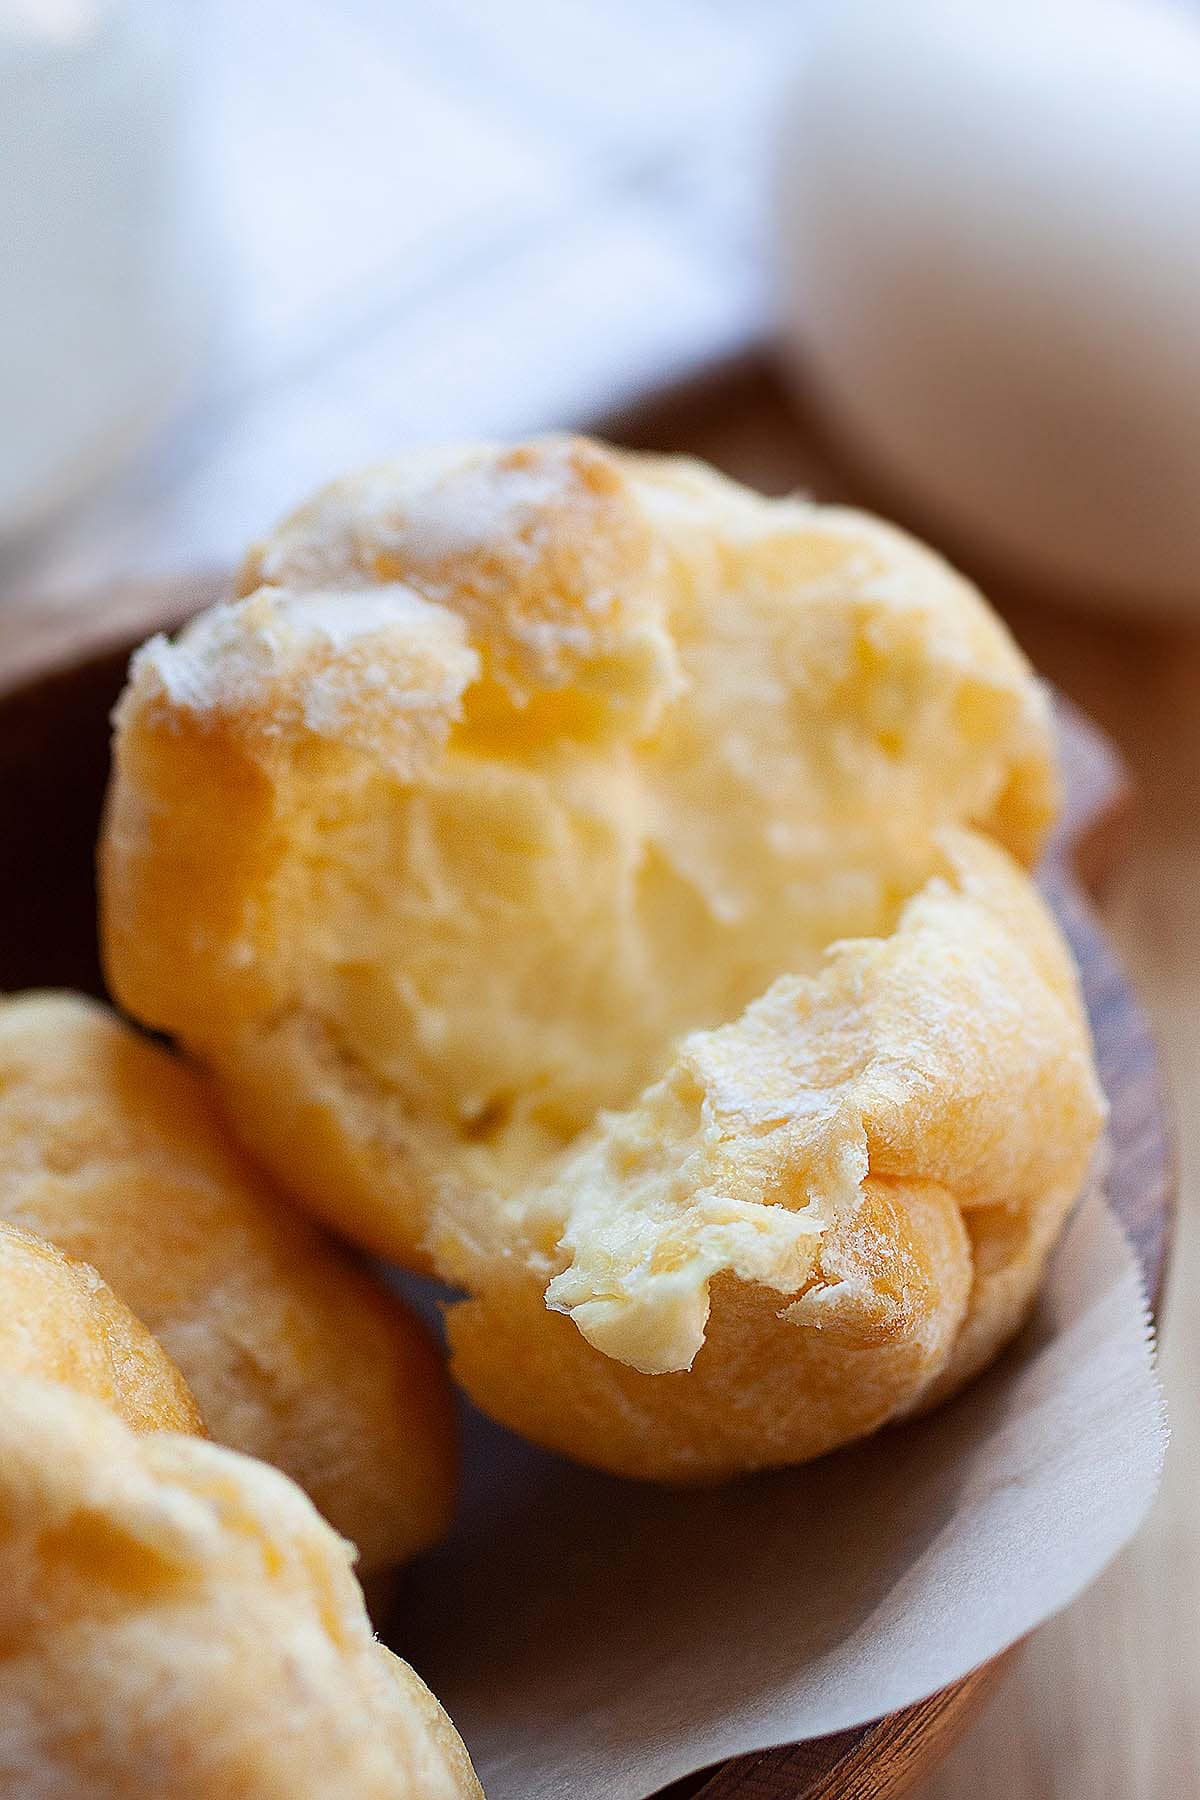 Cream puffs. Fluffy choux pastry filled with creamy custard, so good. You've got to make these cream puffs | rasamalaysia.com